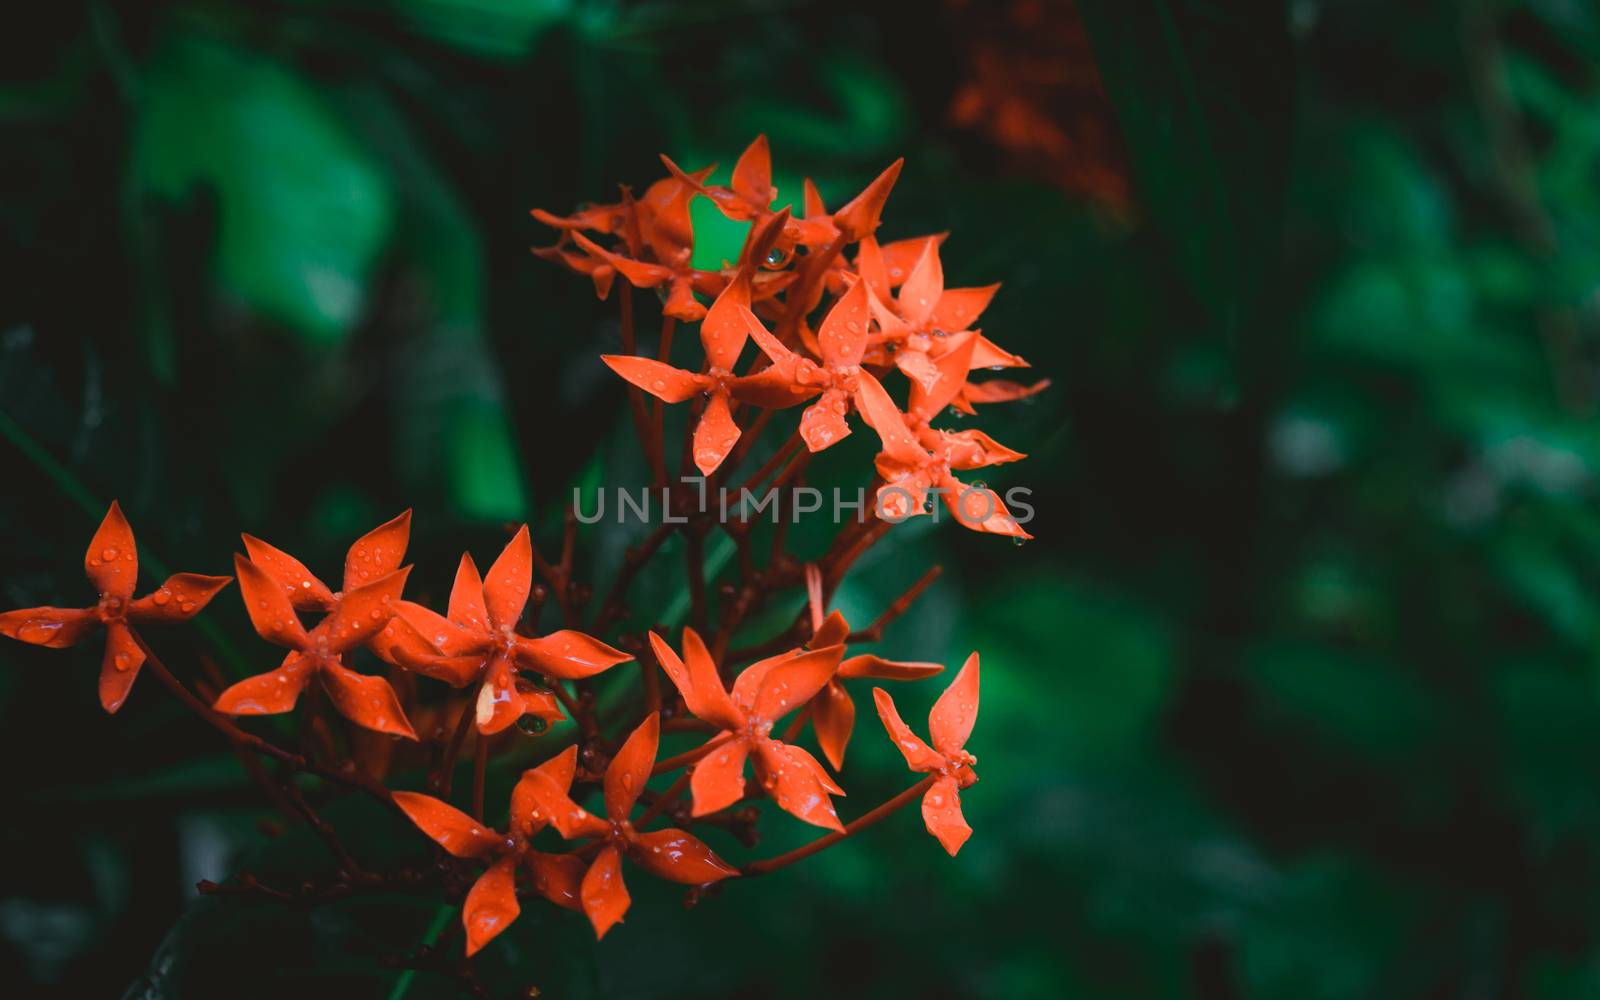 Red flower rain. Wet in water. Ixora Red tiny Flower Plant drenched in rain - Beautiful Home Decor Plant. Flower background design images. Rainy day monsoon season pictures of nature beauty. Close Up.